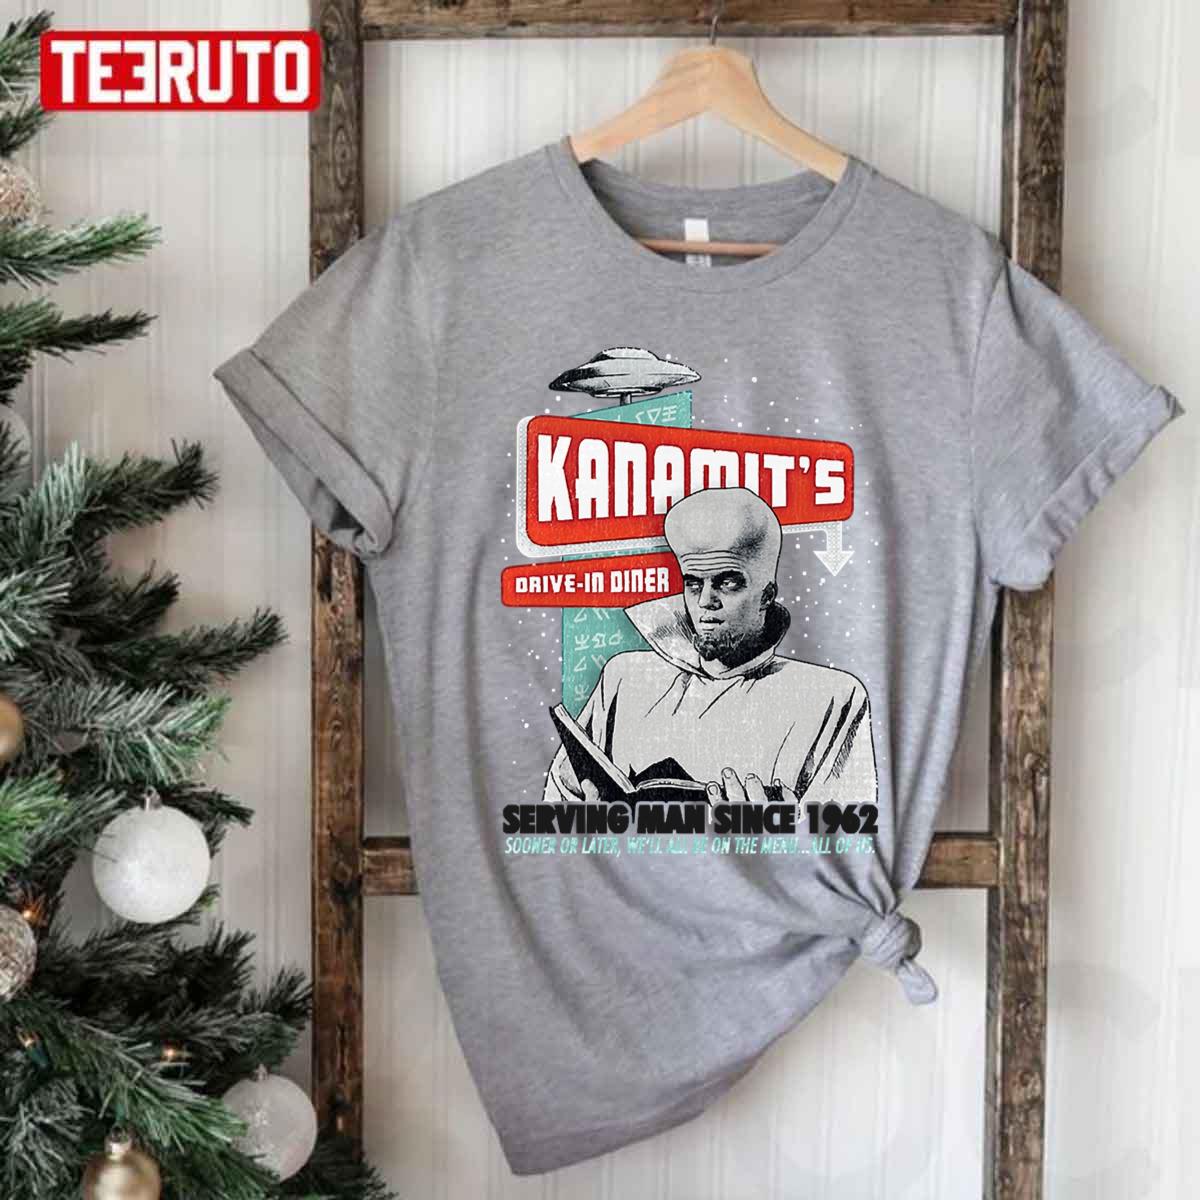 Kanamit’s Serving Man Since 1962 The Another Unisex T-Shirt